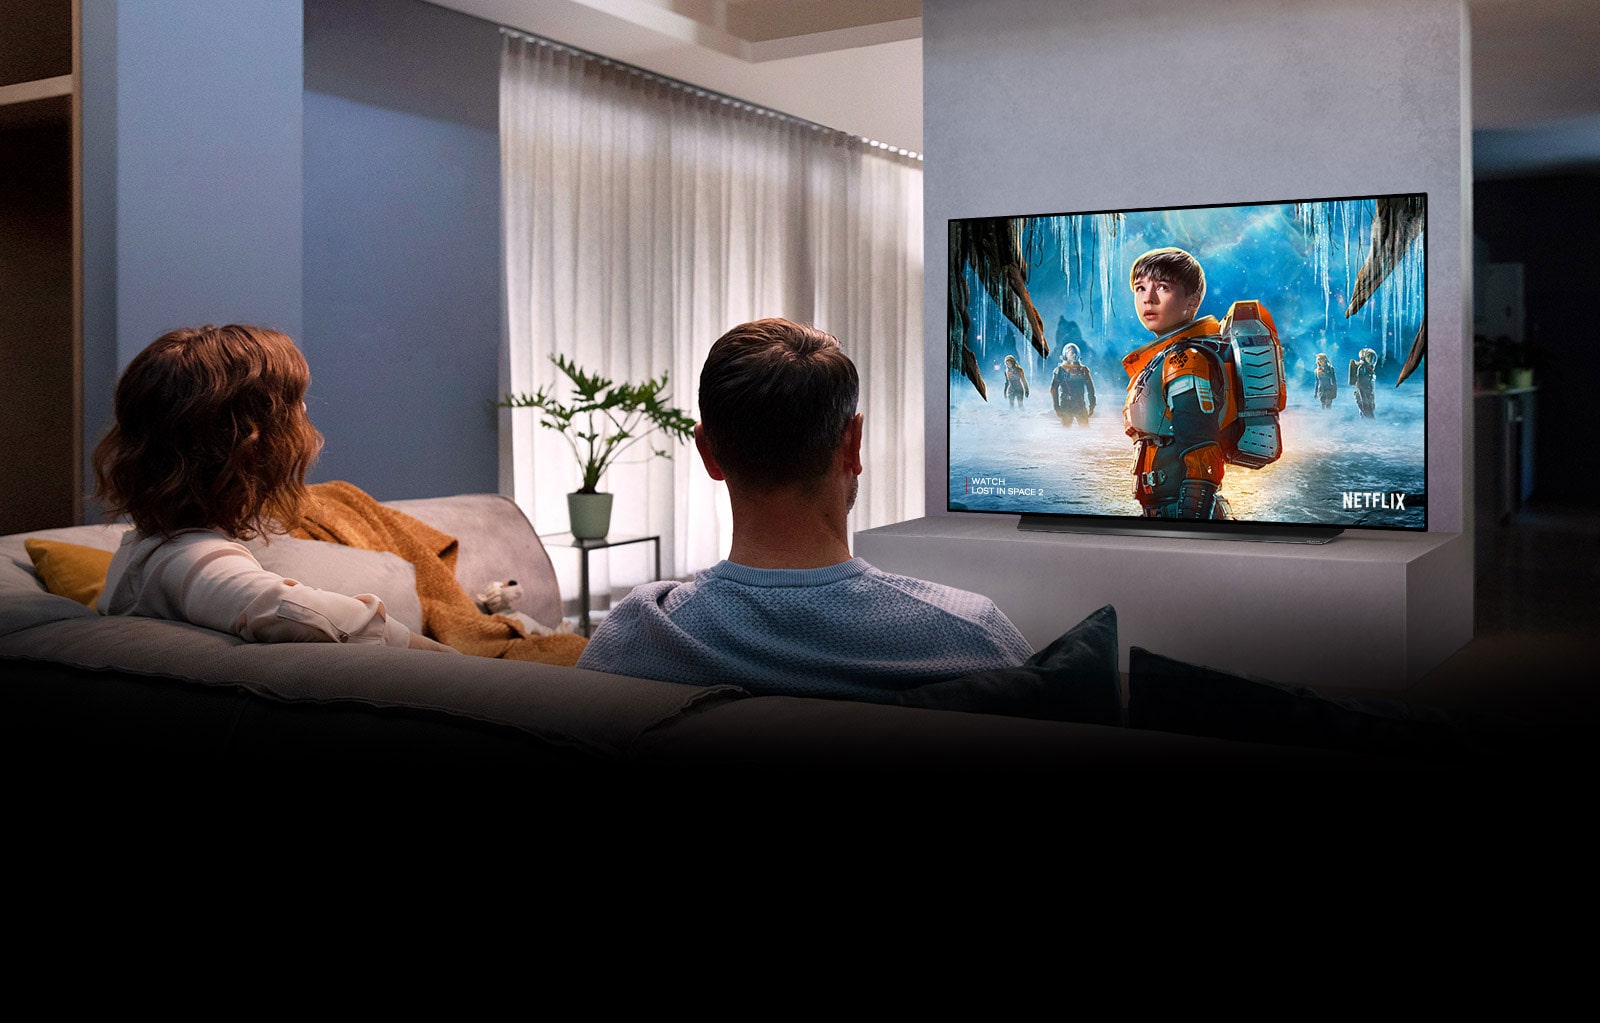 Couple sitting on a sofa in the living room watching a romantic movie on TV